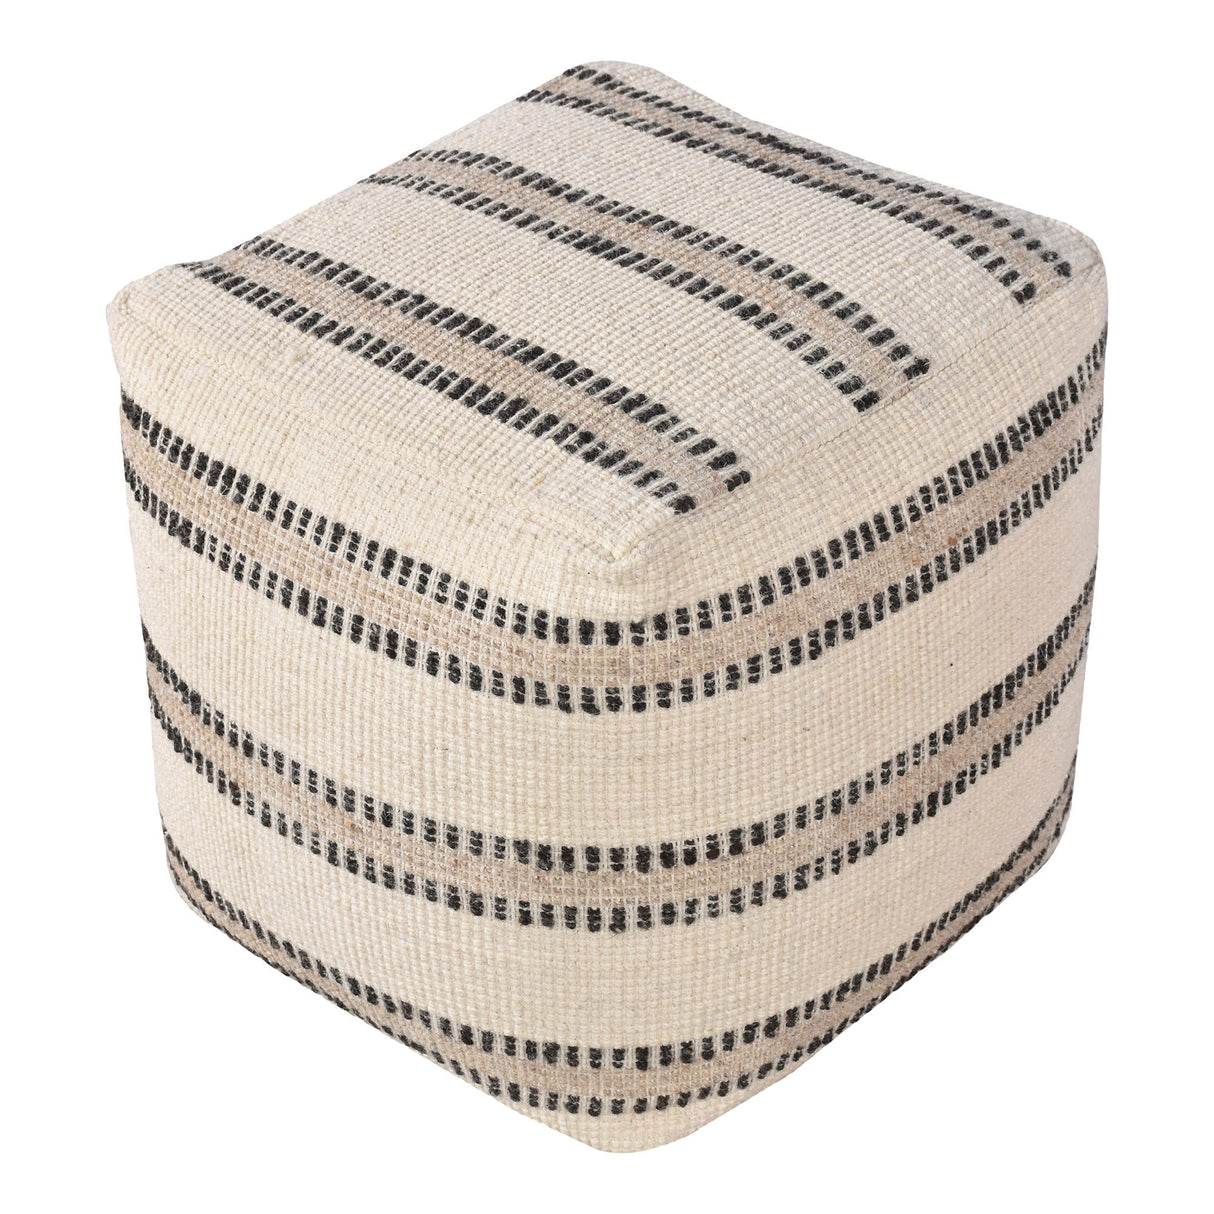 Puf Bally împletit manual ivory/charcoal 40x40x40 cm House Nordic